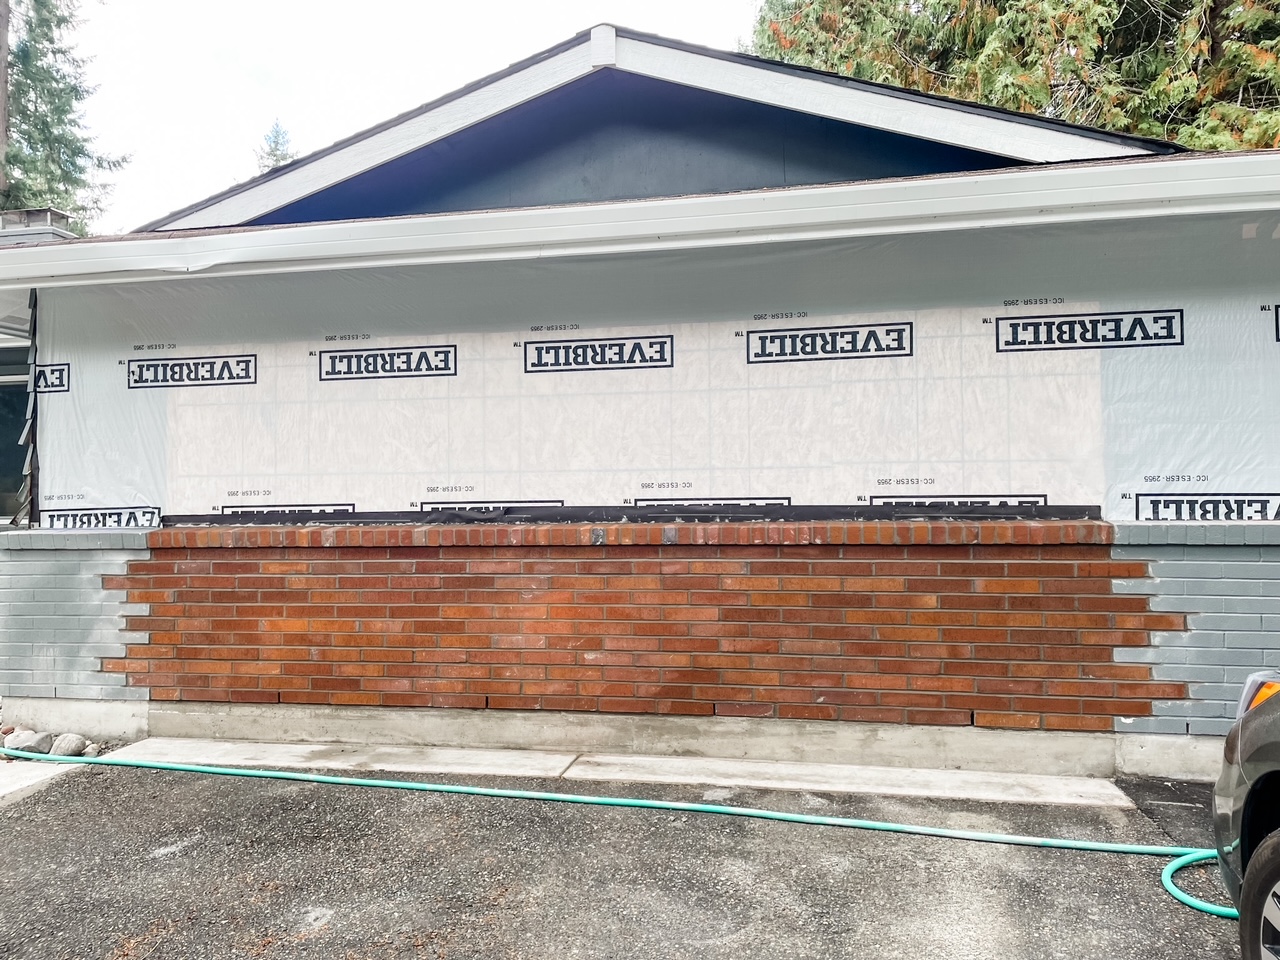 The brick wall constructed in place of the garage door